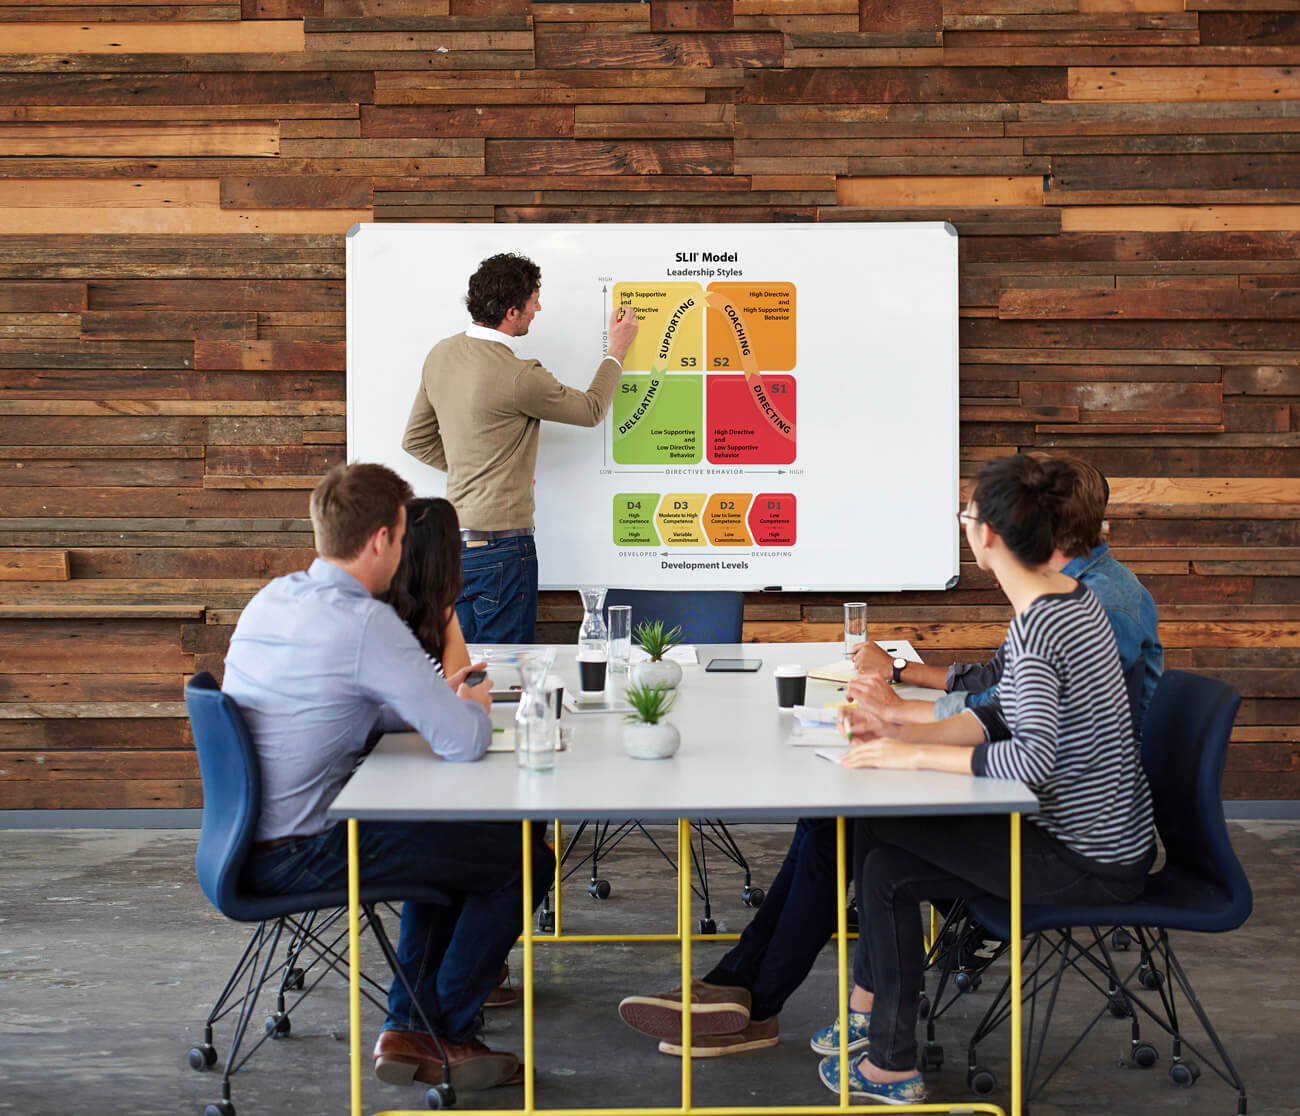 Team members having a meeting - Big whiteboard displaying a graph table